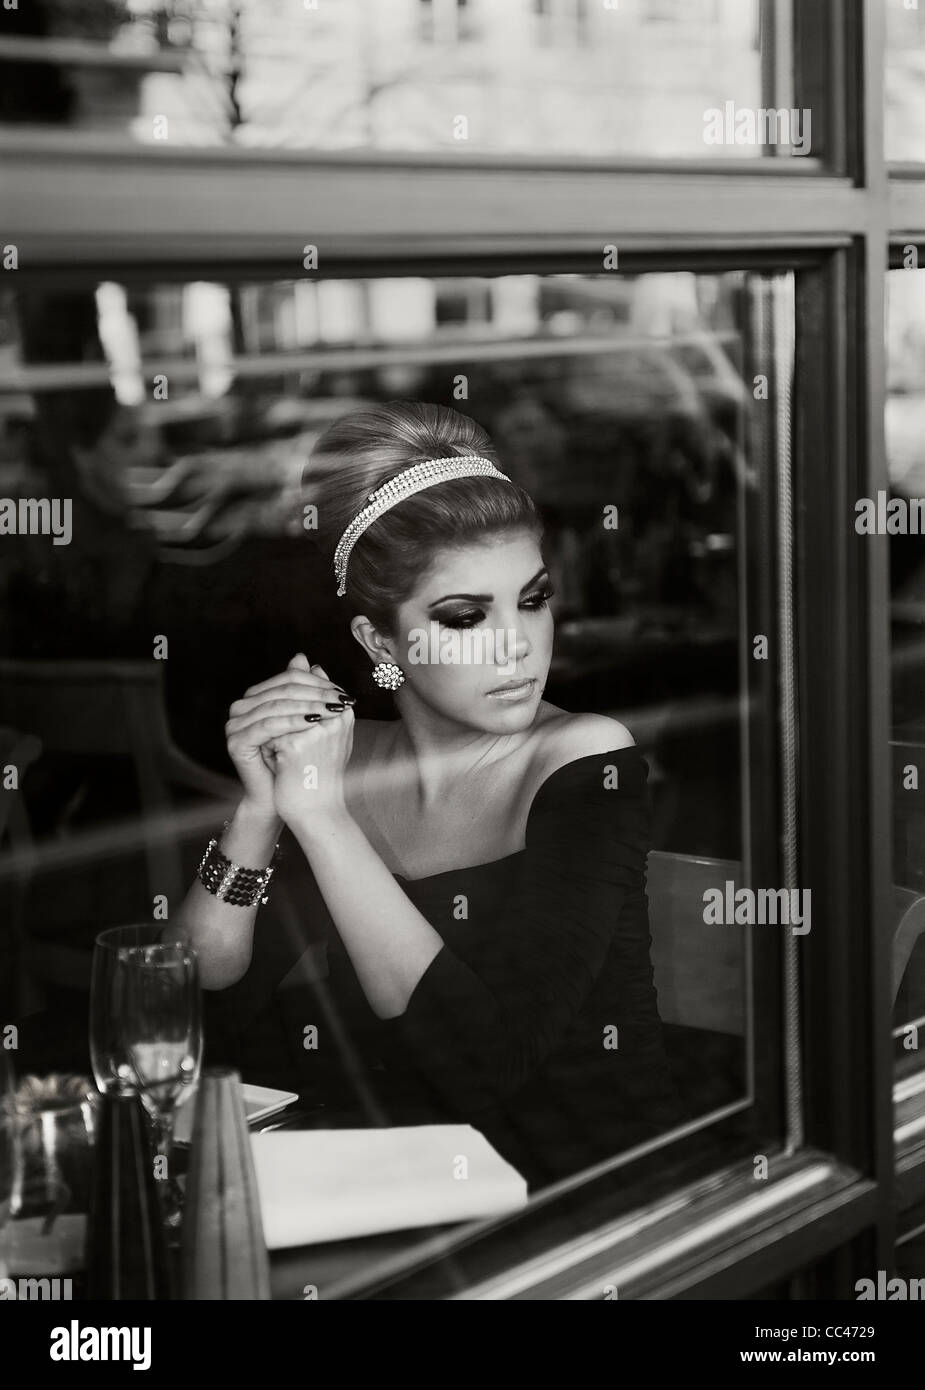 A woman waits patiently at a restaurant as she looks out the window, in black and white. Stock Photo